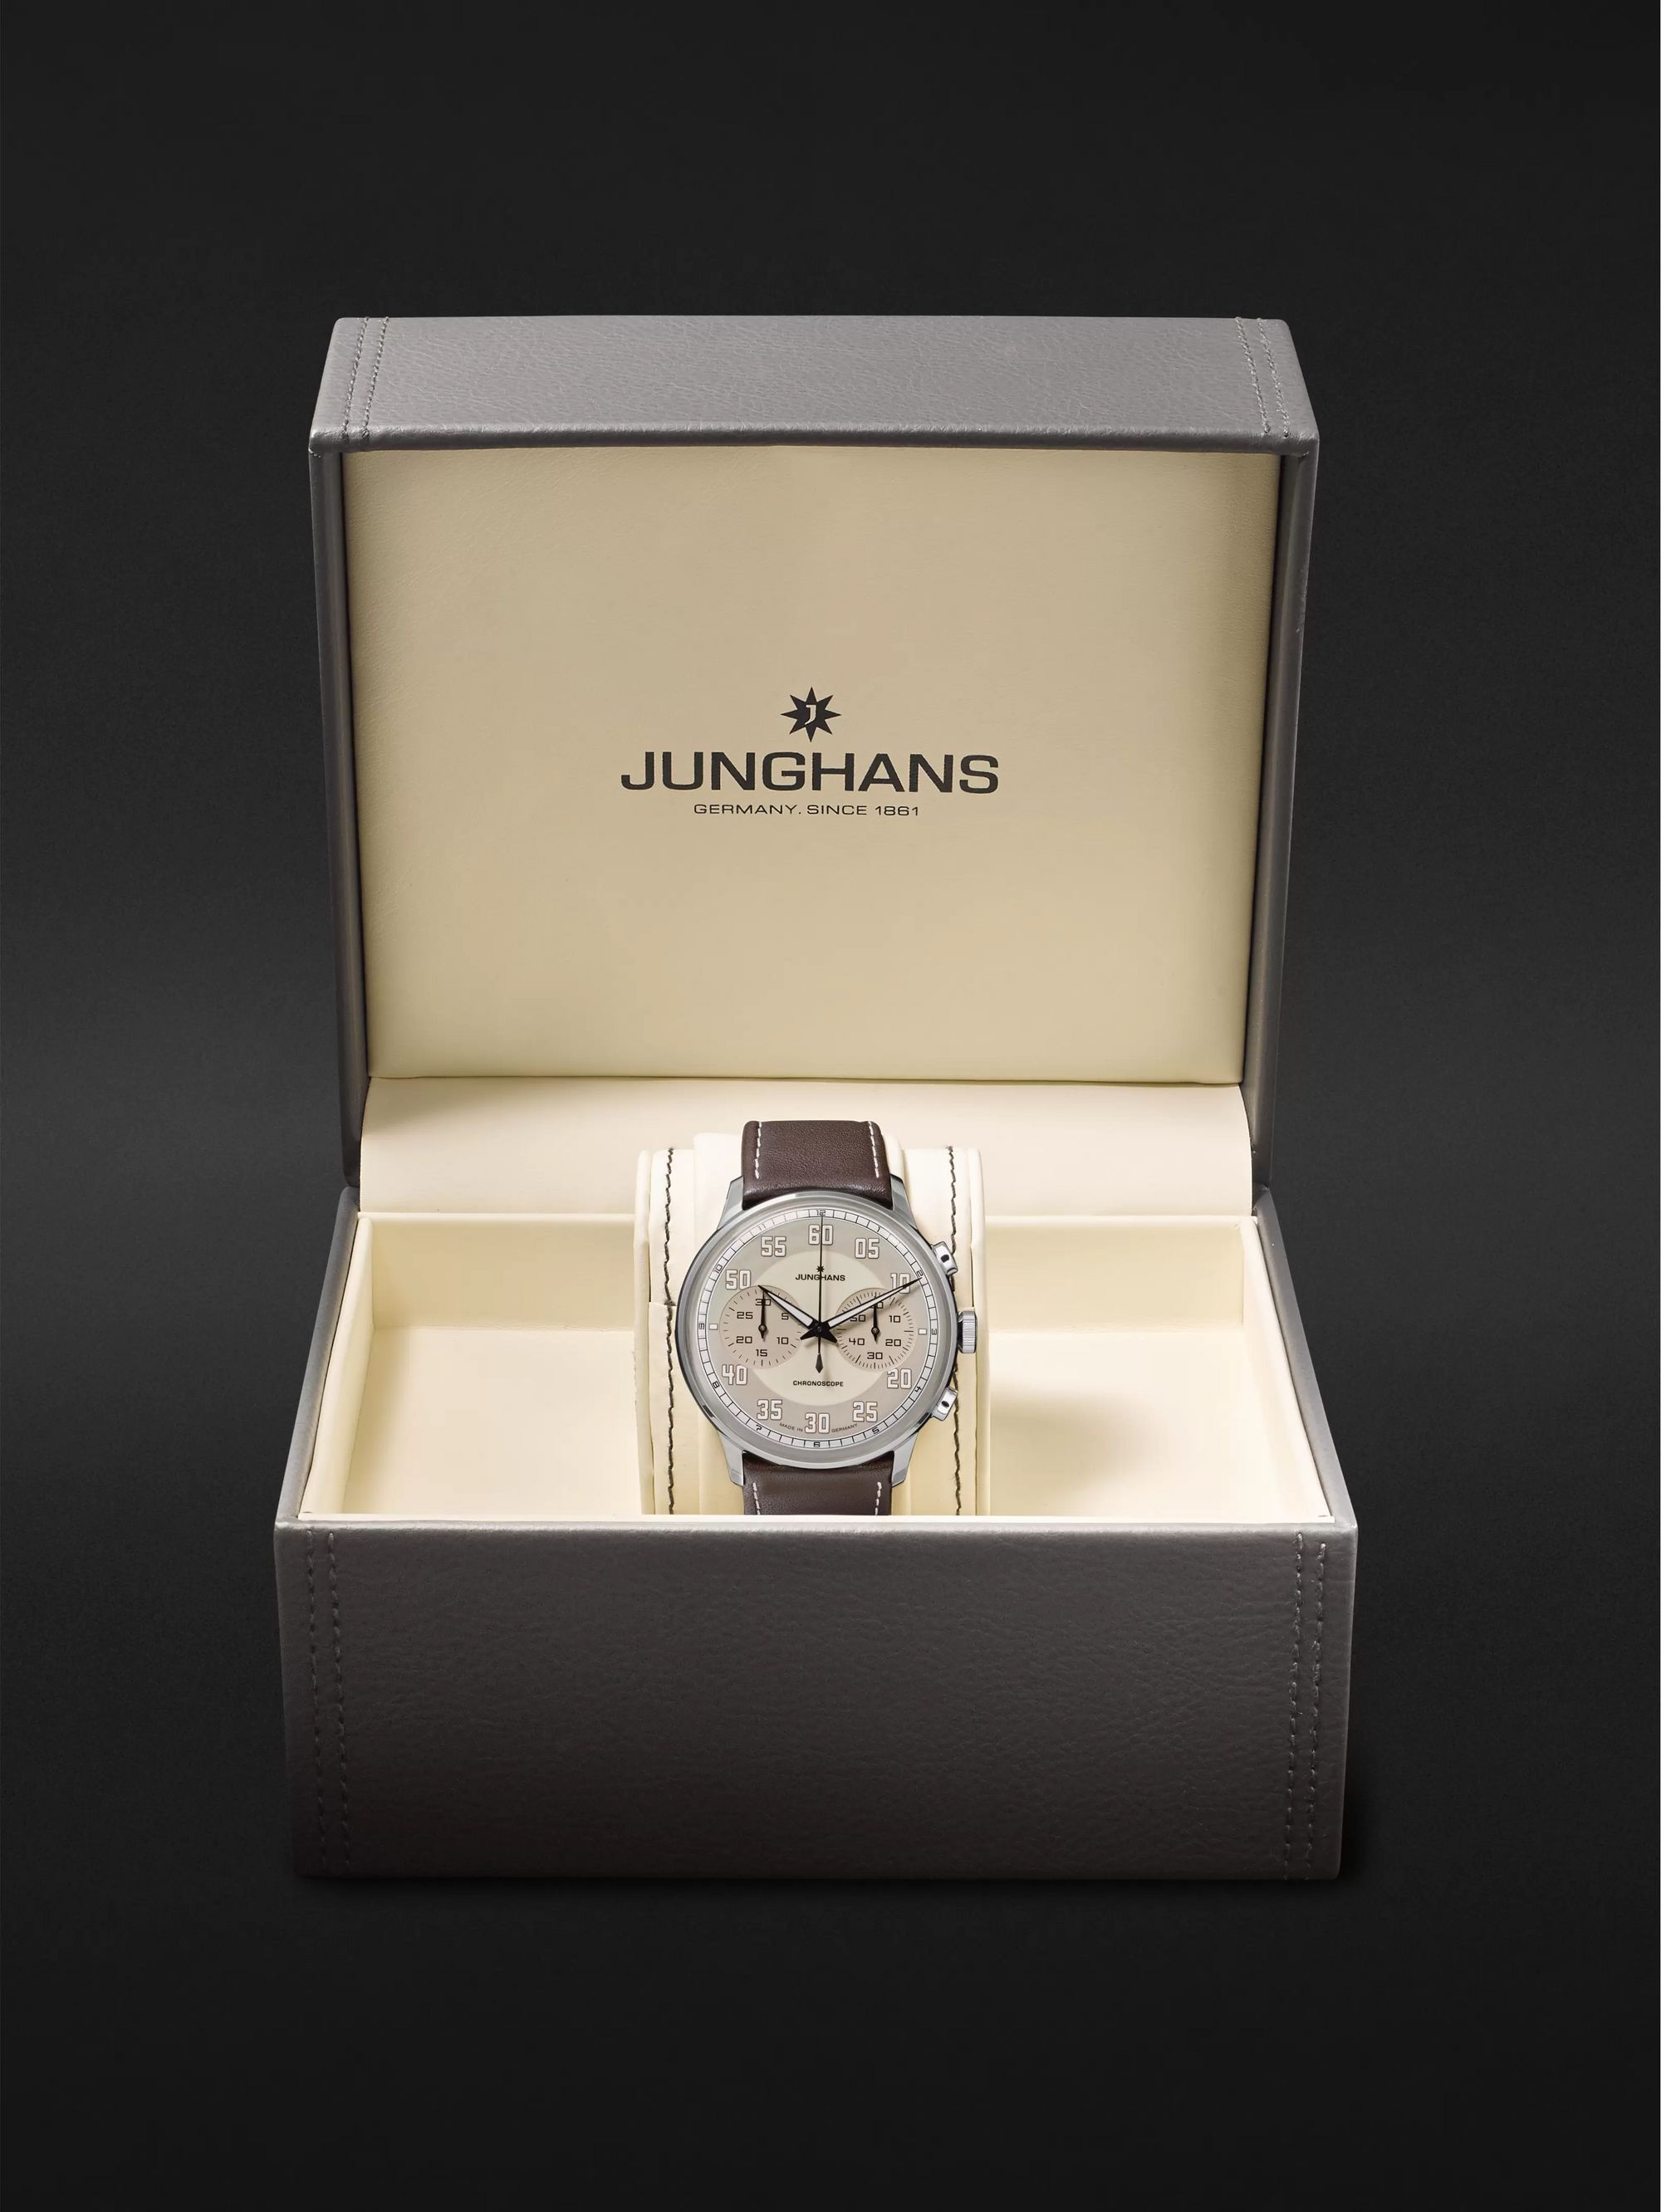 JUNGHANS Meister Driver Automatic Chronoscope 40mm Stainless Steel and Leather Watch, Ref. No. 027/3684.00